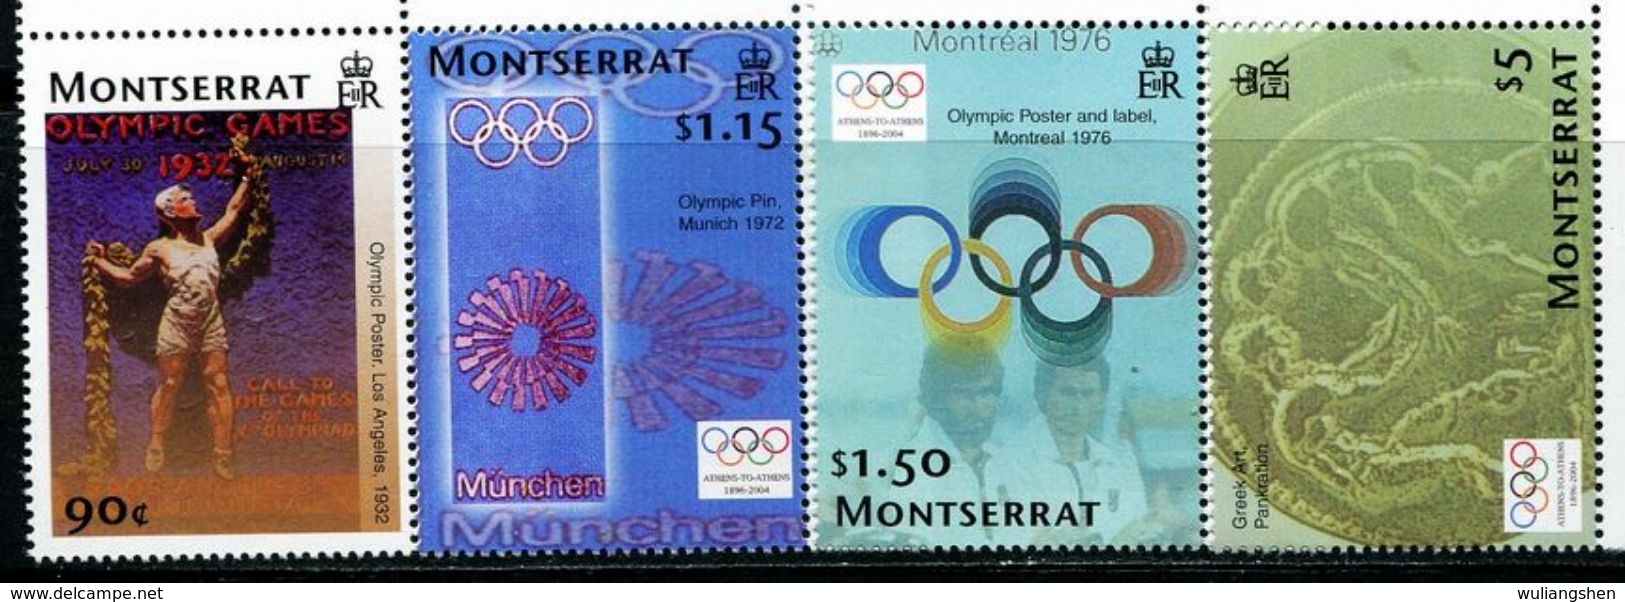 AT3527 Montserrat 2004 Athens Olympic Games 4V MNH - Sommer 2004: Athen - Paralympics